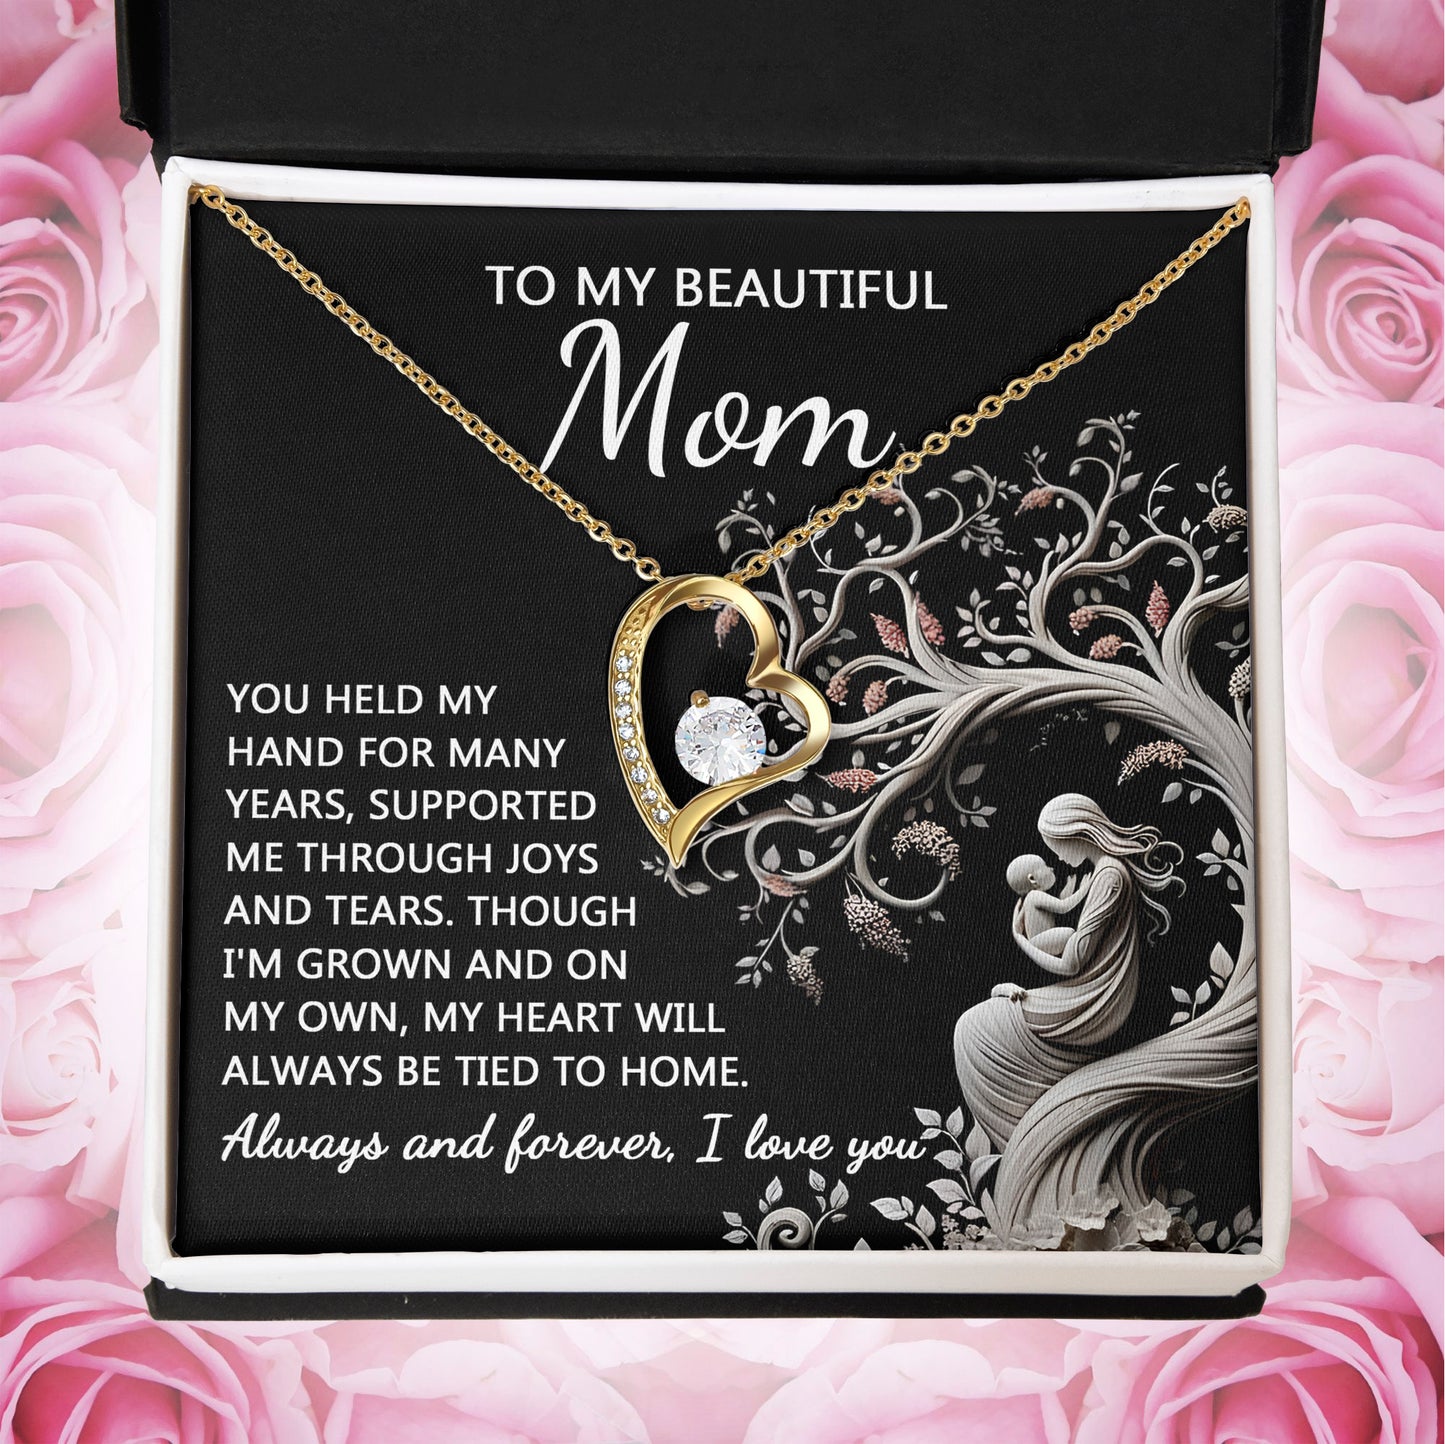 To My Beautiful Mom My Heart Will Always Be Tied to Home Forever Love Heart Pendant Necklace